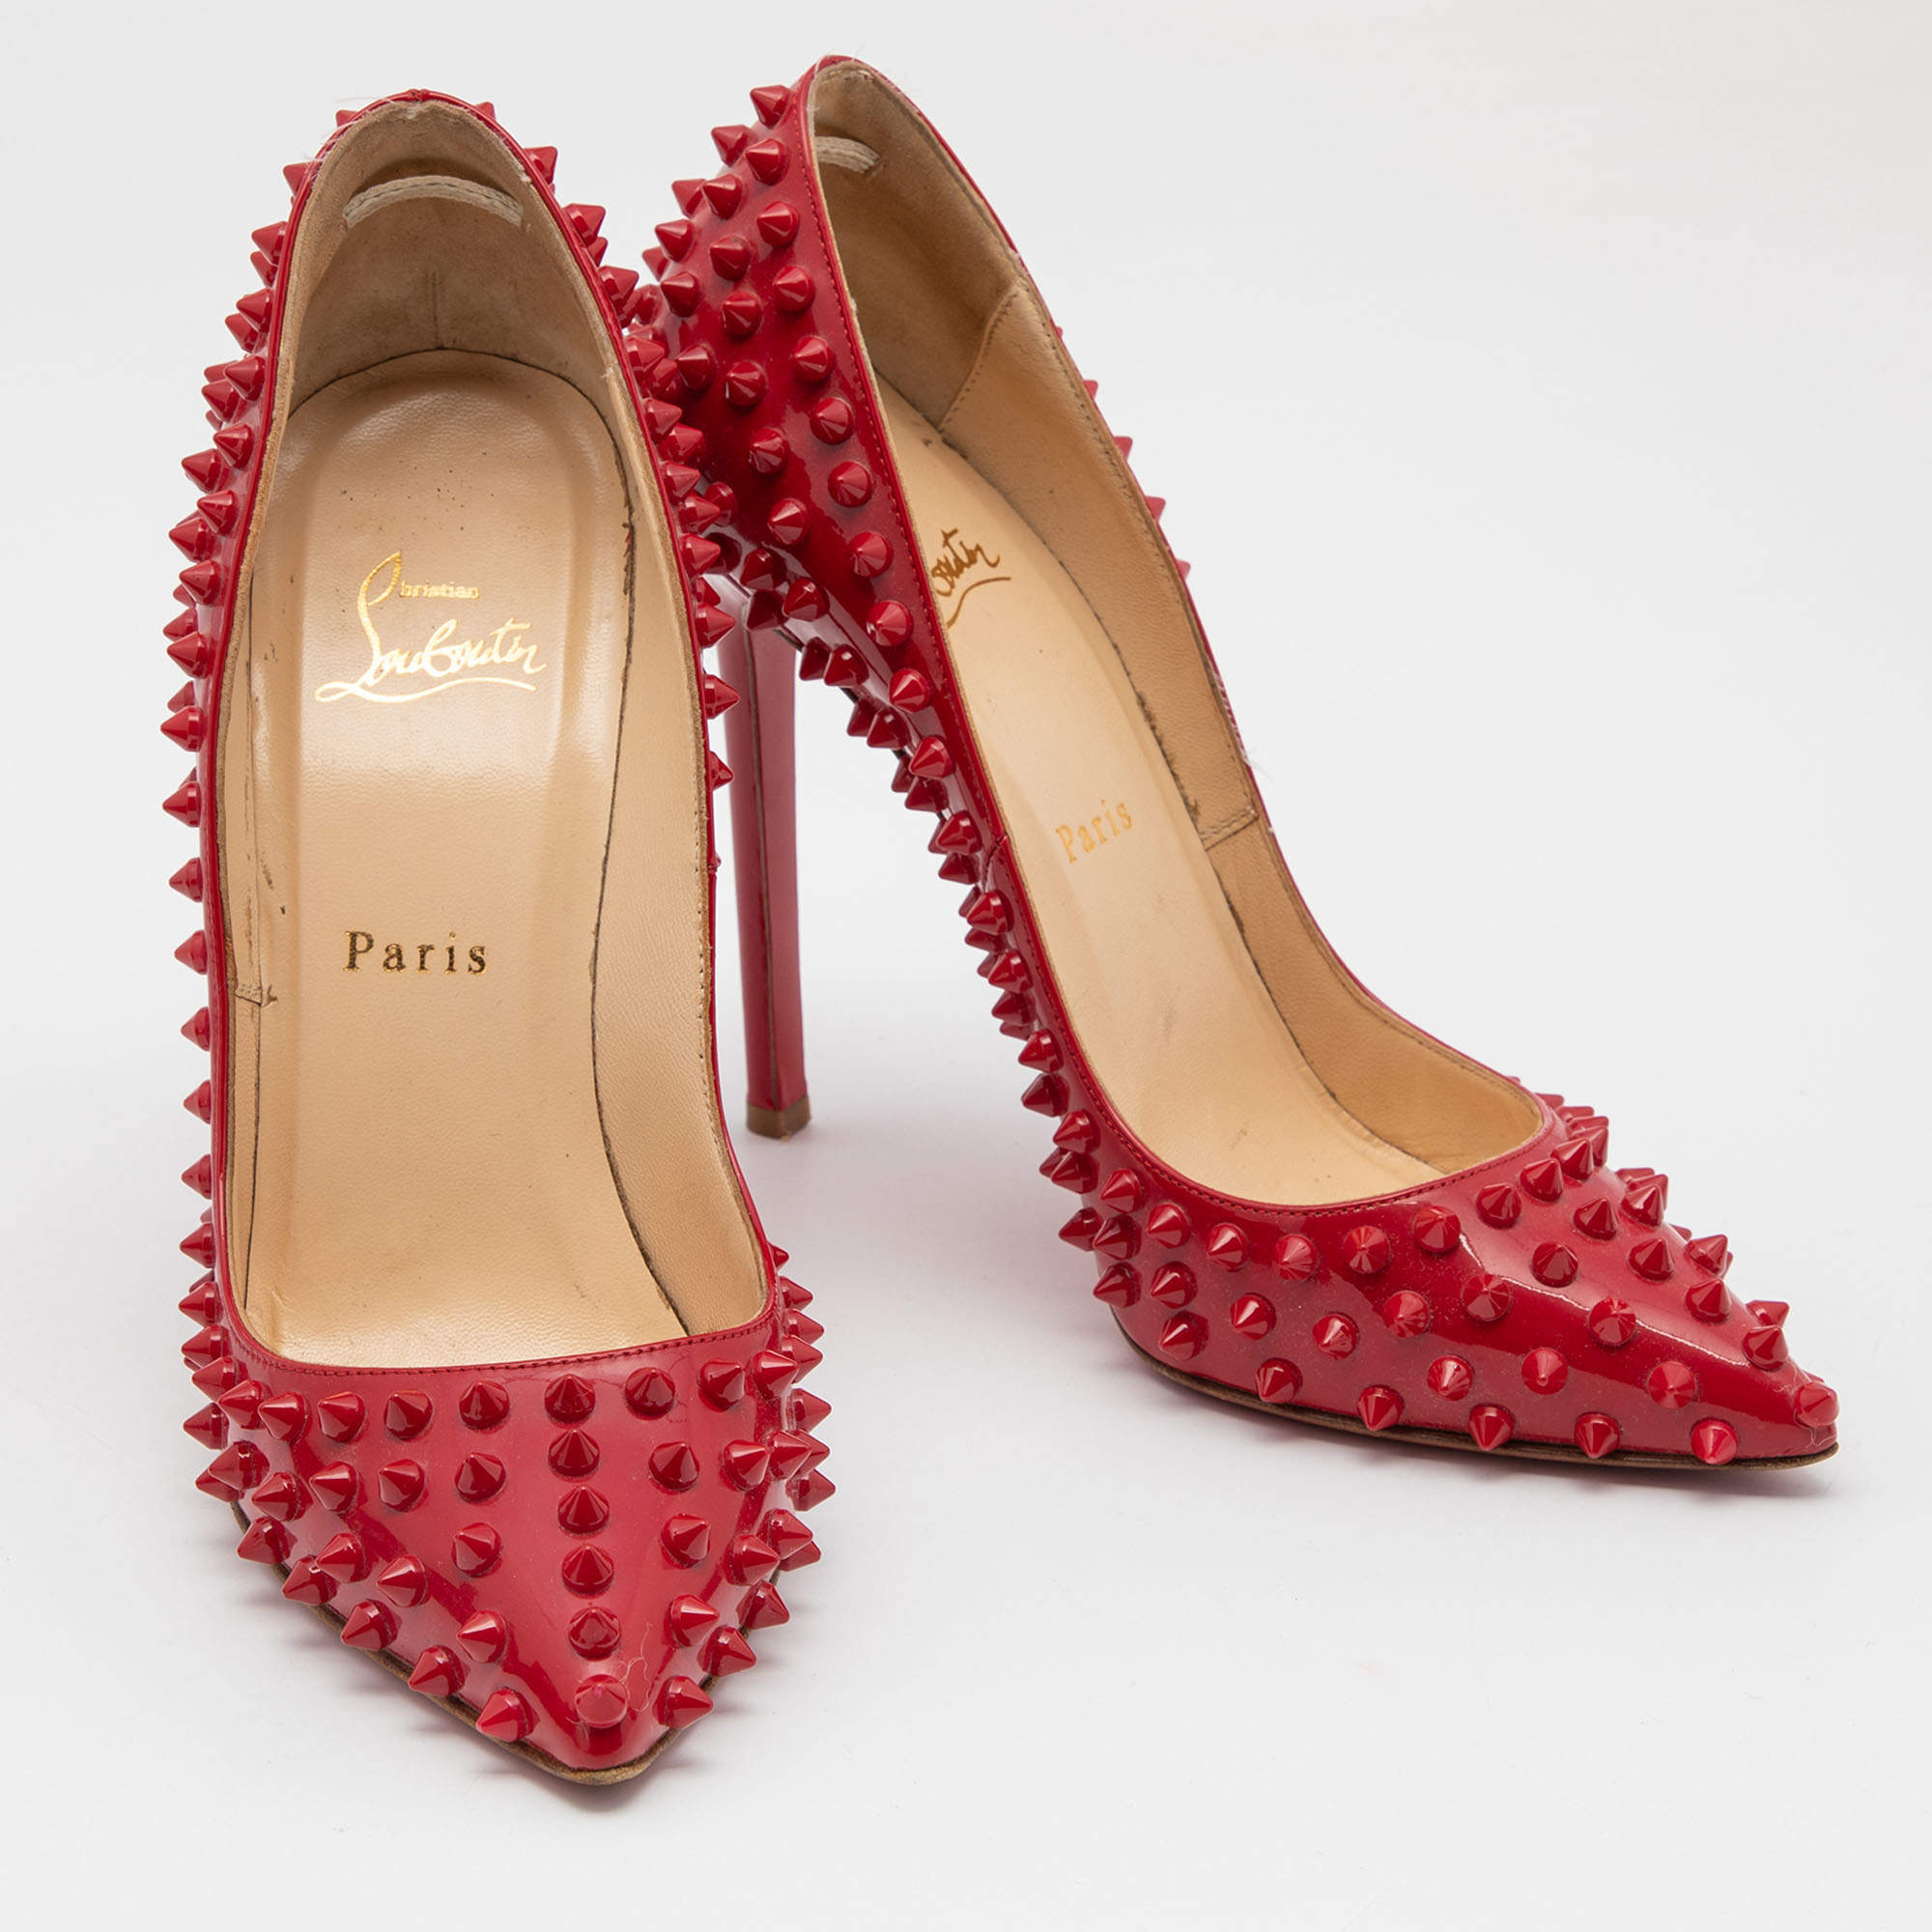 Christian Louboutin Pigalle 120m Spikes Patent Leather Pumps in